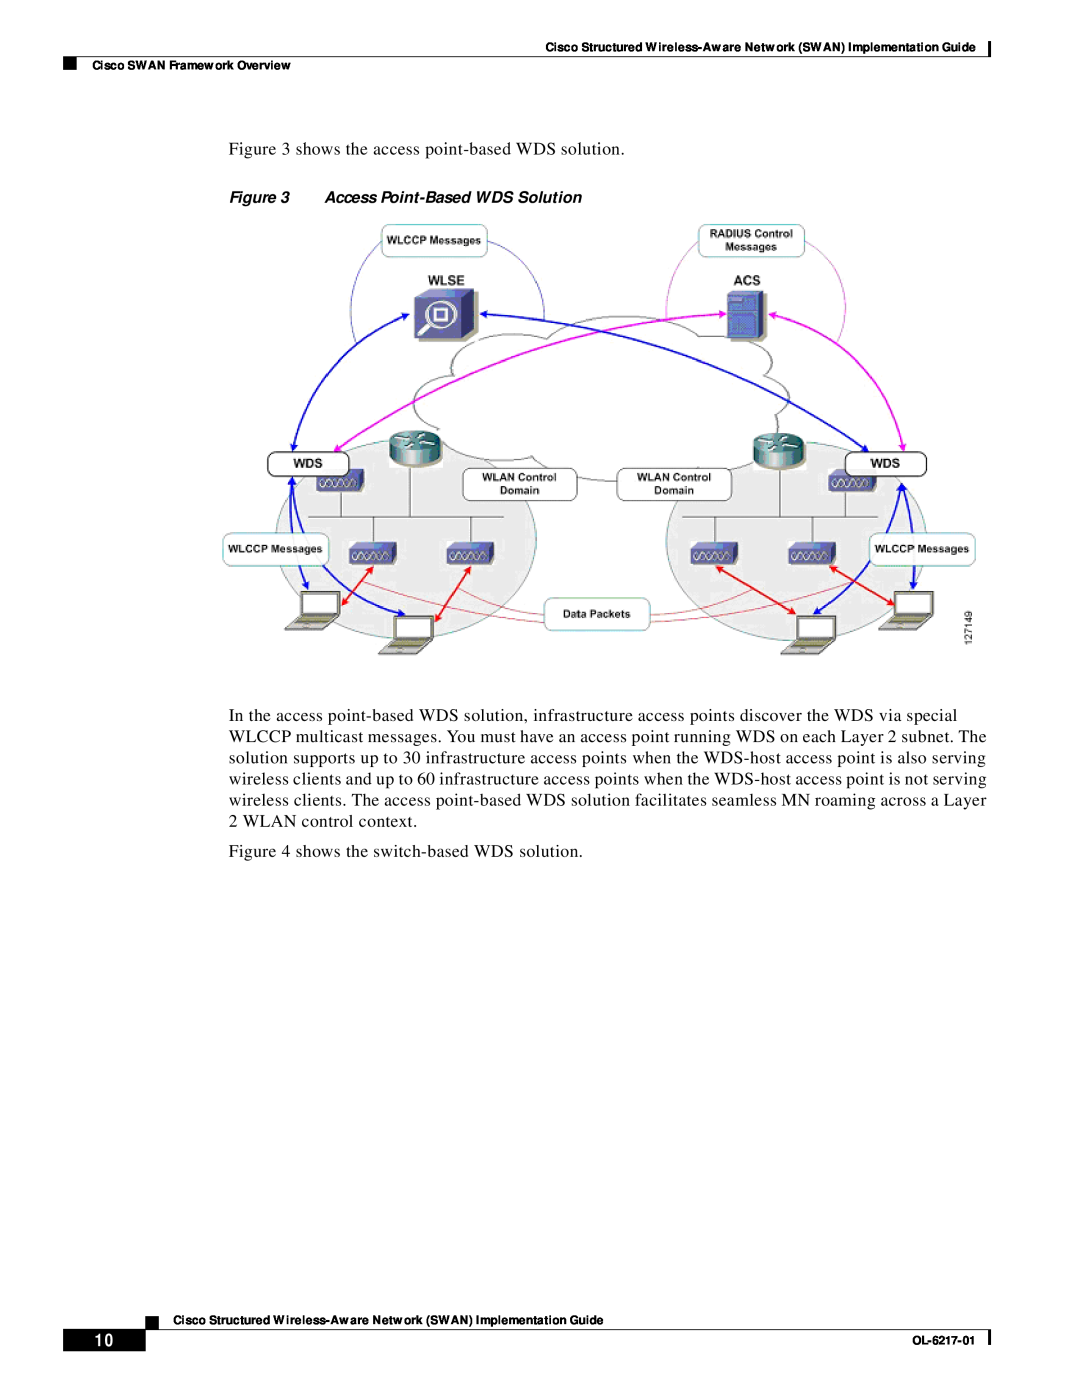 Cisco Systems OL-6217-01 manual shows the access point-based WDS solution 